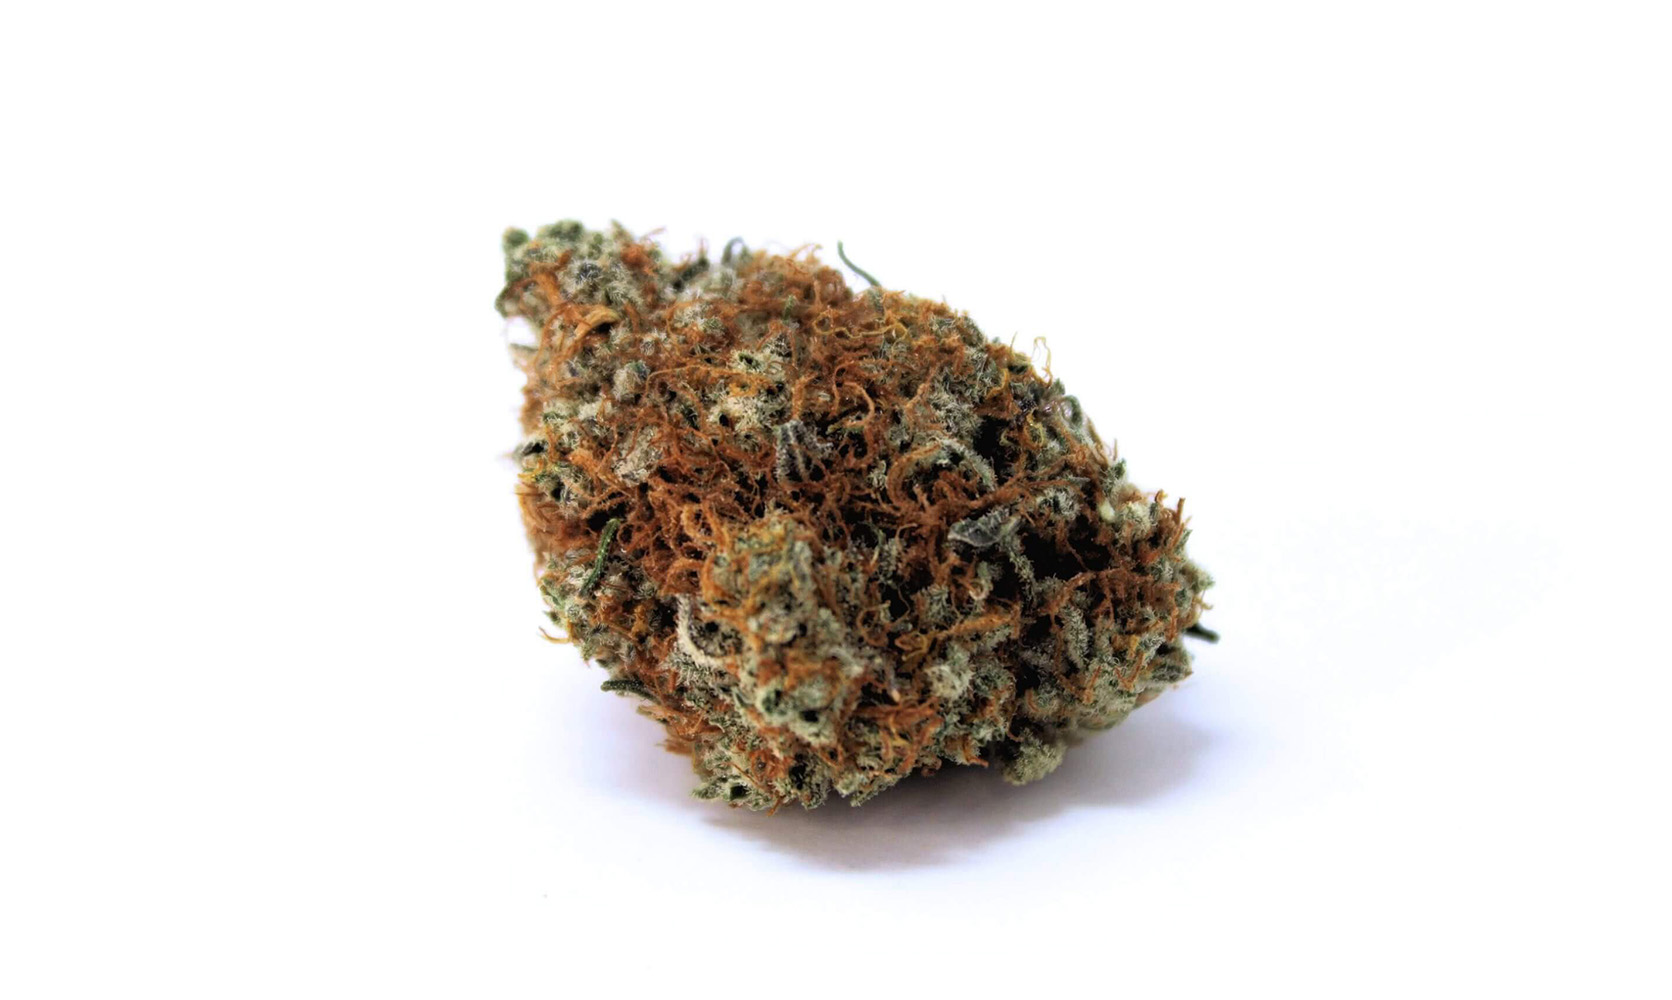 Master Scout weed strain budget buds at Low Price Bud online dispensary Canada for cheap weed.